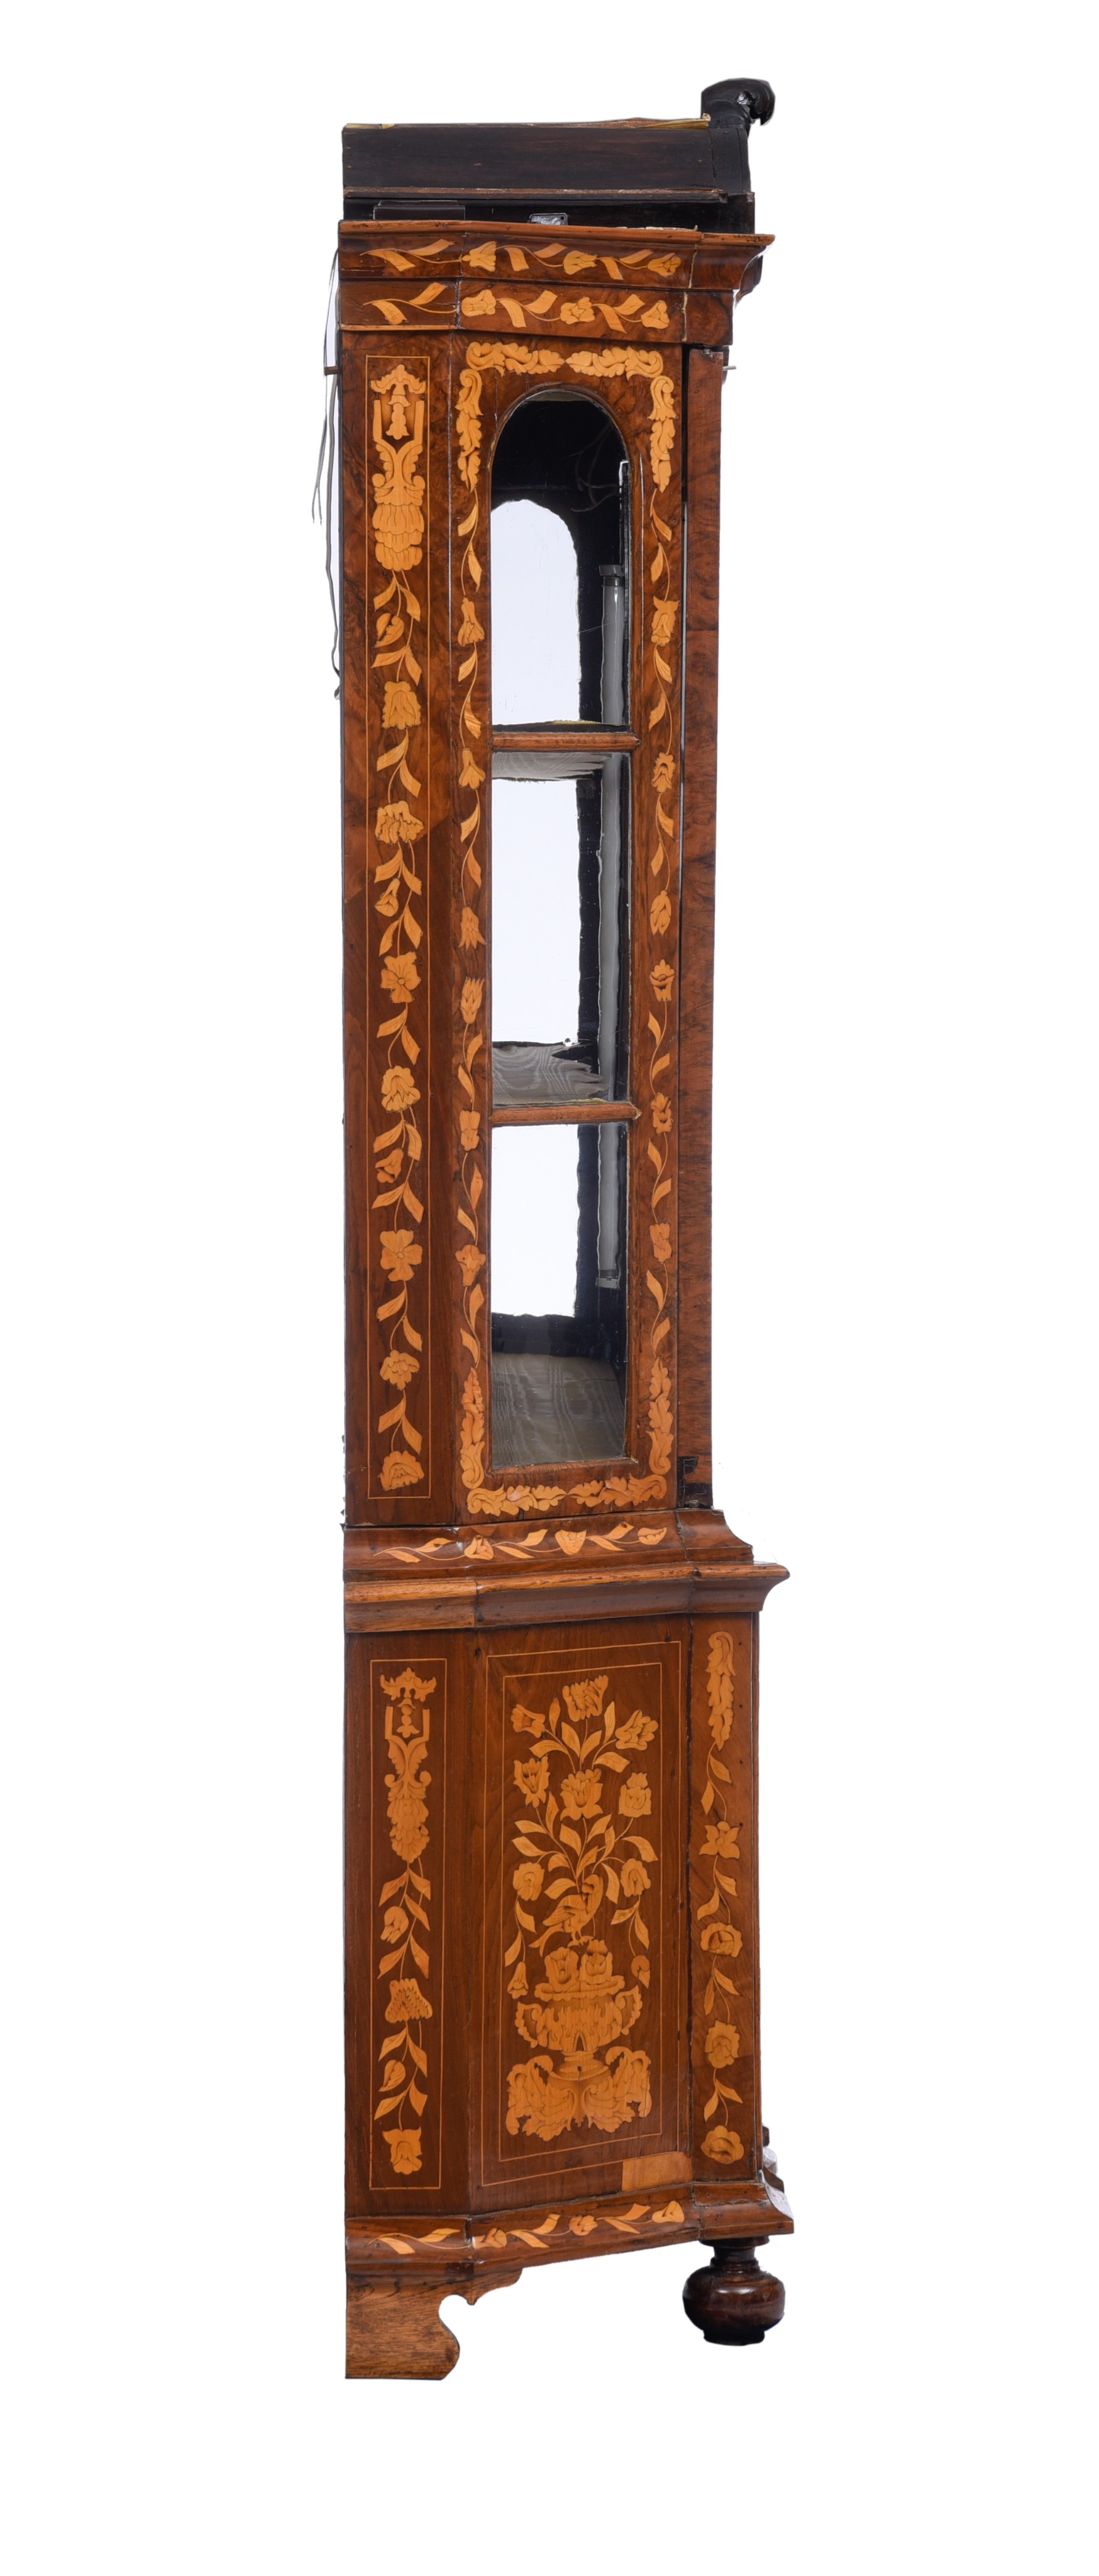 A large Dutch floral marquetry display cabinet, 18thC, H 230 - W 212 - D 45 cm - Image 2 of 5